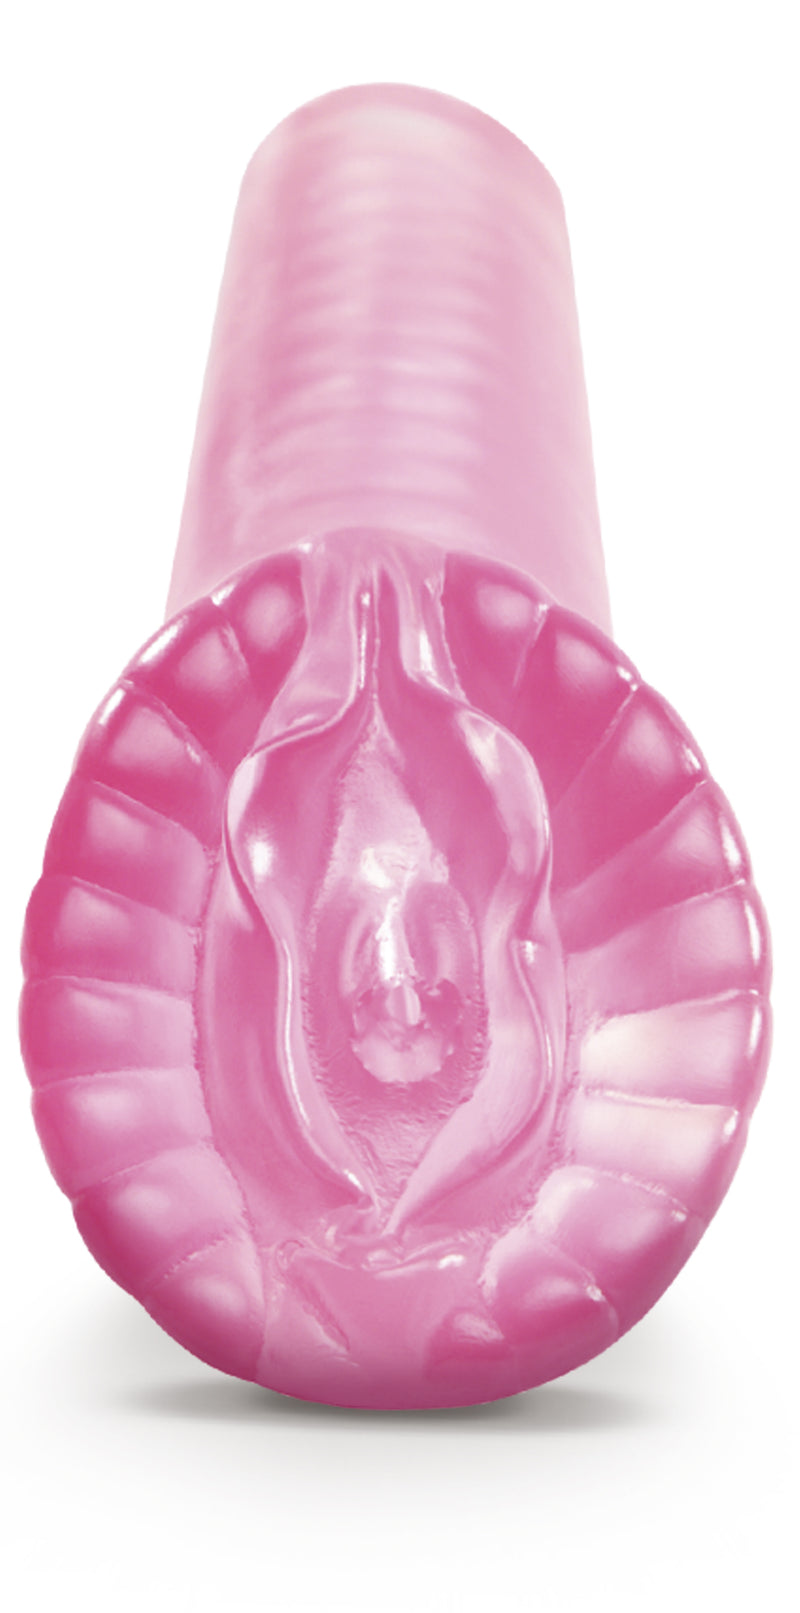 Power Up Your Performance with the Pussy Pump Toy - Feel Bigger, Harder, and More Satisfied!